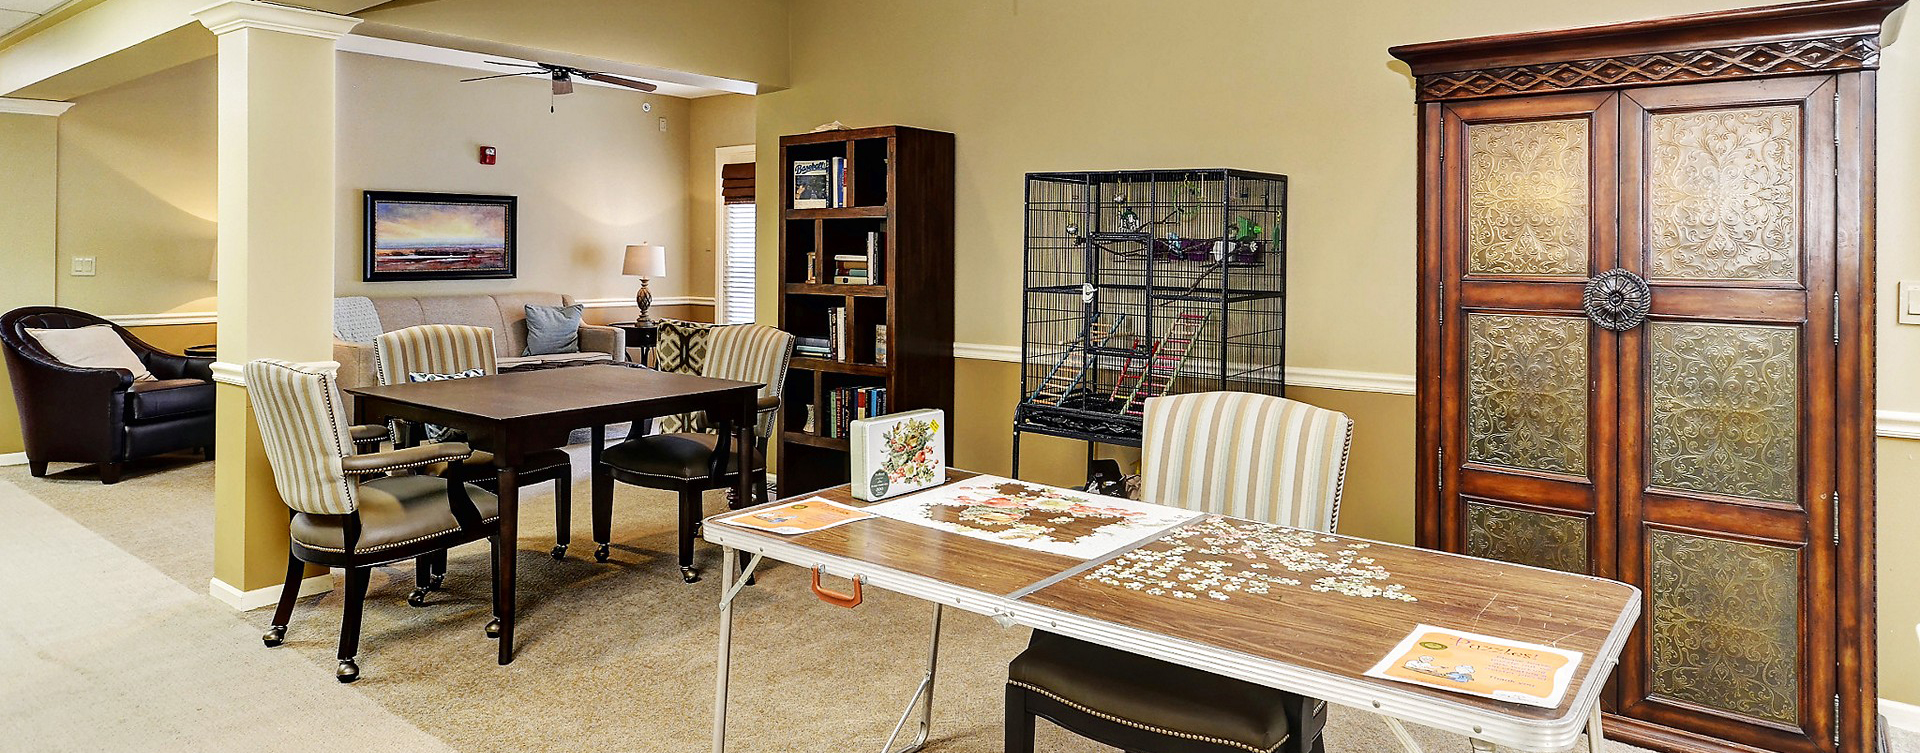 Enjoy a good card game with friends in the activity room at Bickford of Crystal Lake